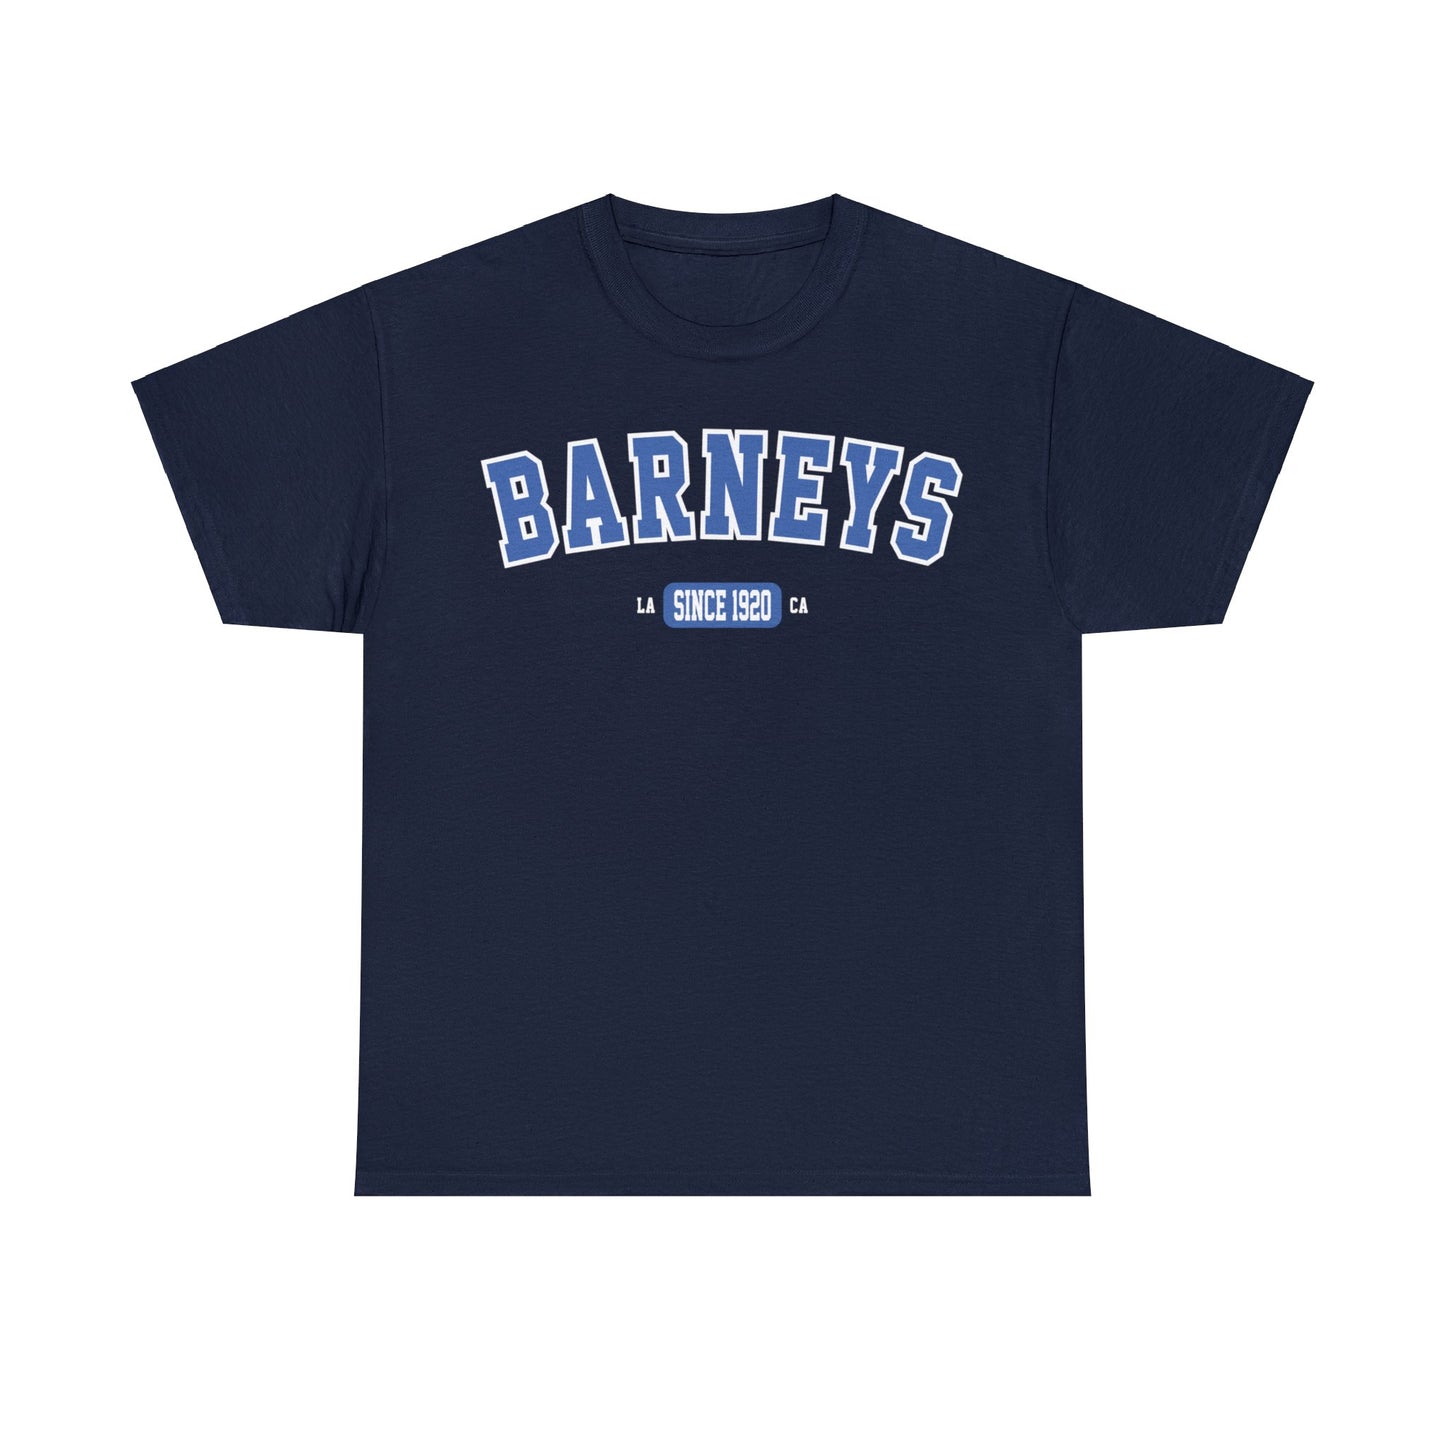 Vintage Collegiate | BARNEY'S BEANERY - Women's Graphic Tee | Navy Gildan 5000 T-Shirt, Blue Graphic, Front View Flat Lay